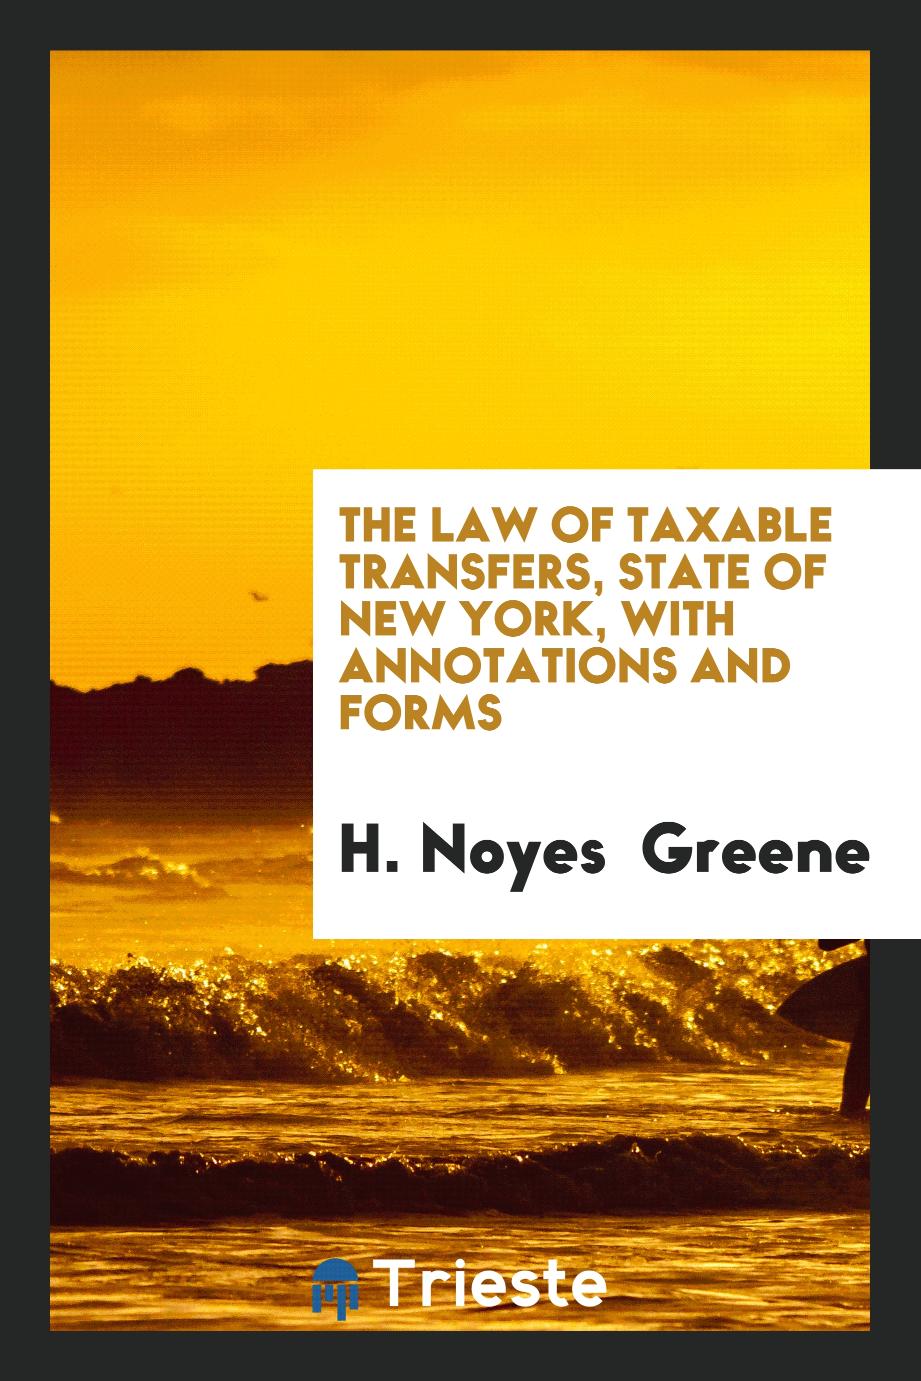 The Law of Taxable Transfers, State of New York, with Annotations and Forms